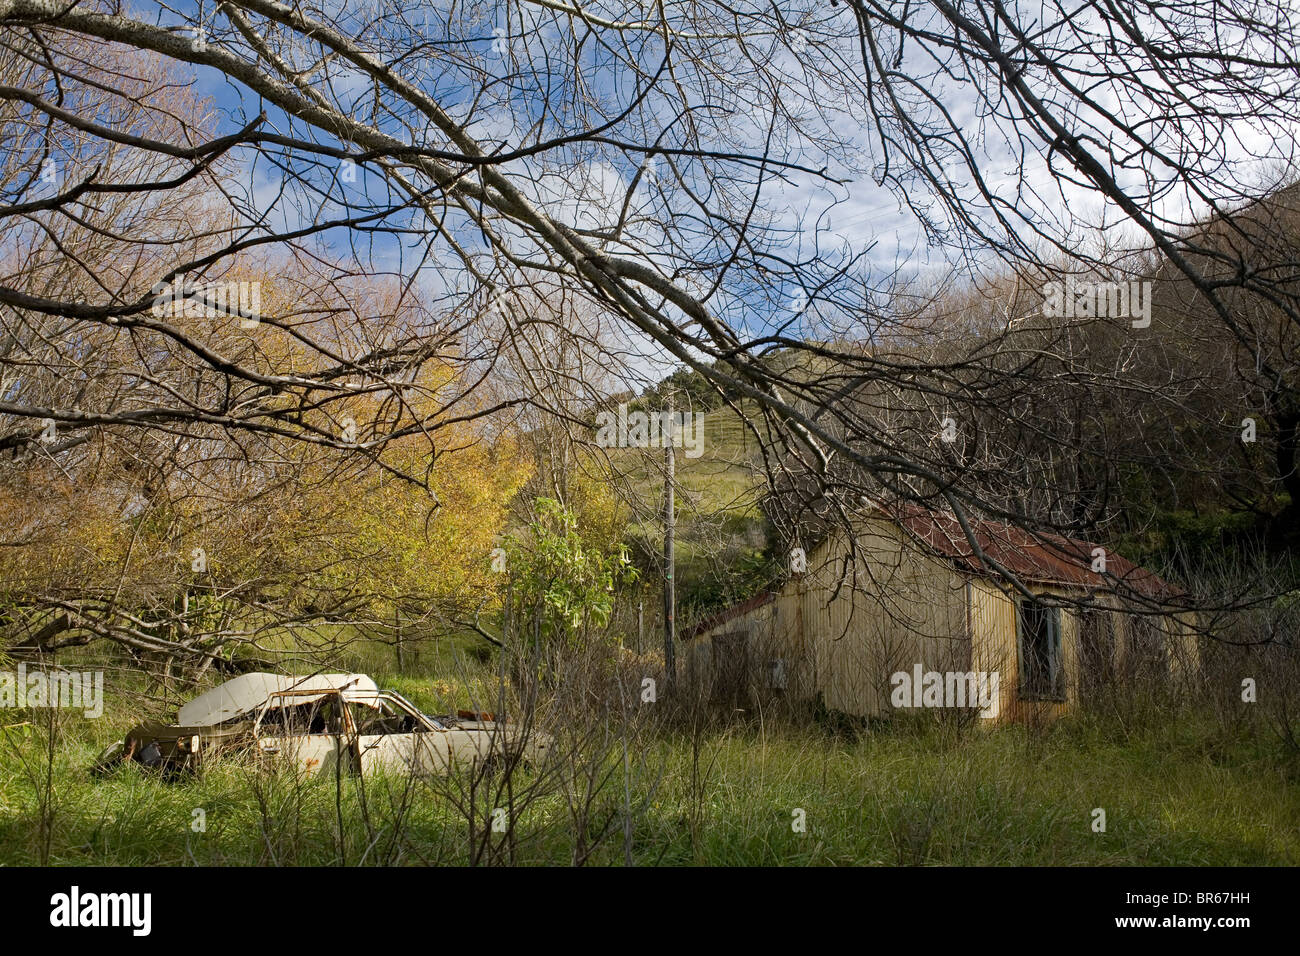 An abandoned car and house in the East Cape town of Tokomaru Bay, New Zealand. Stock Photo